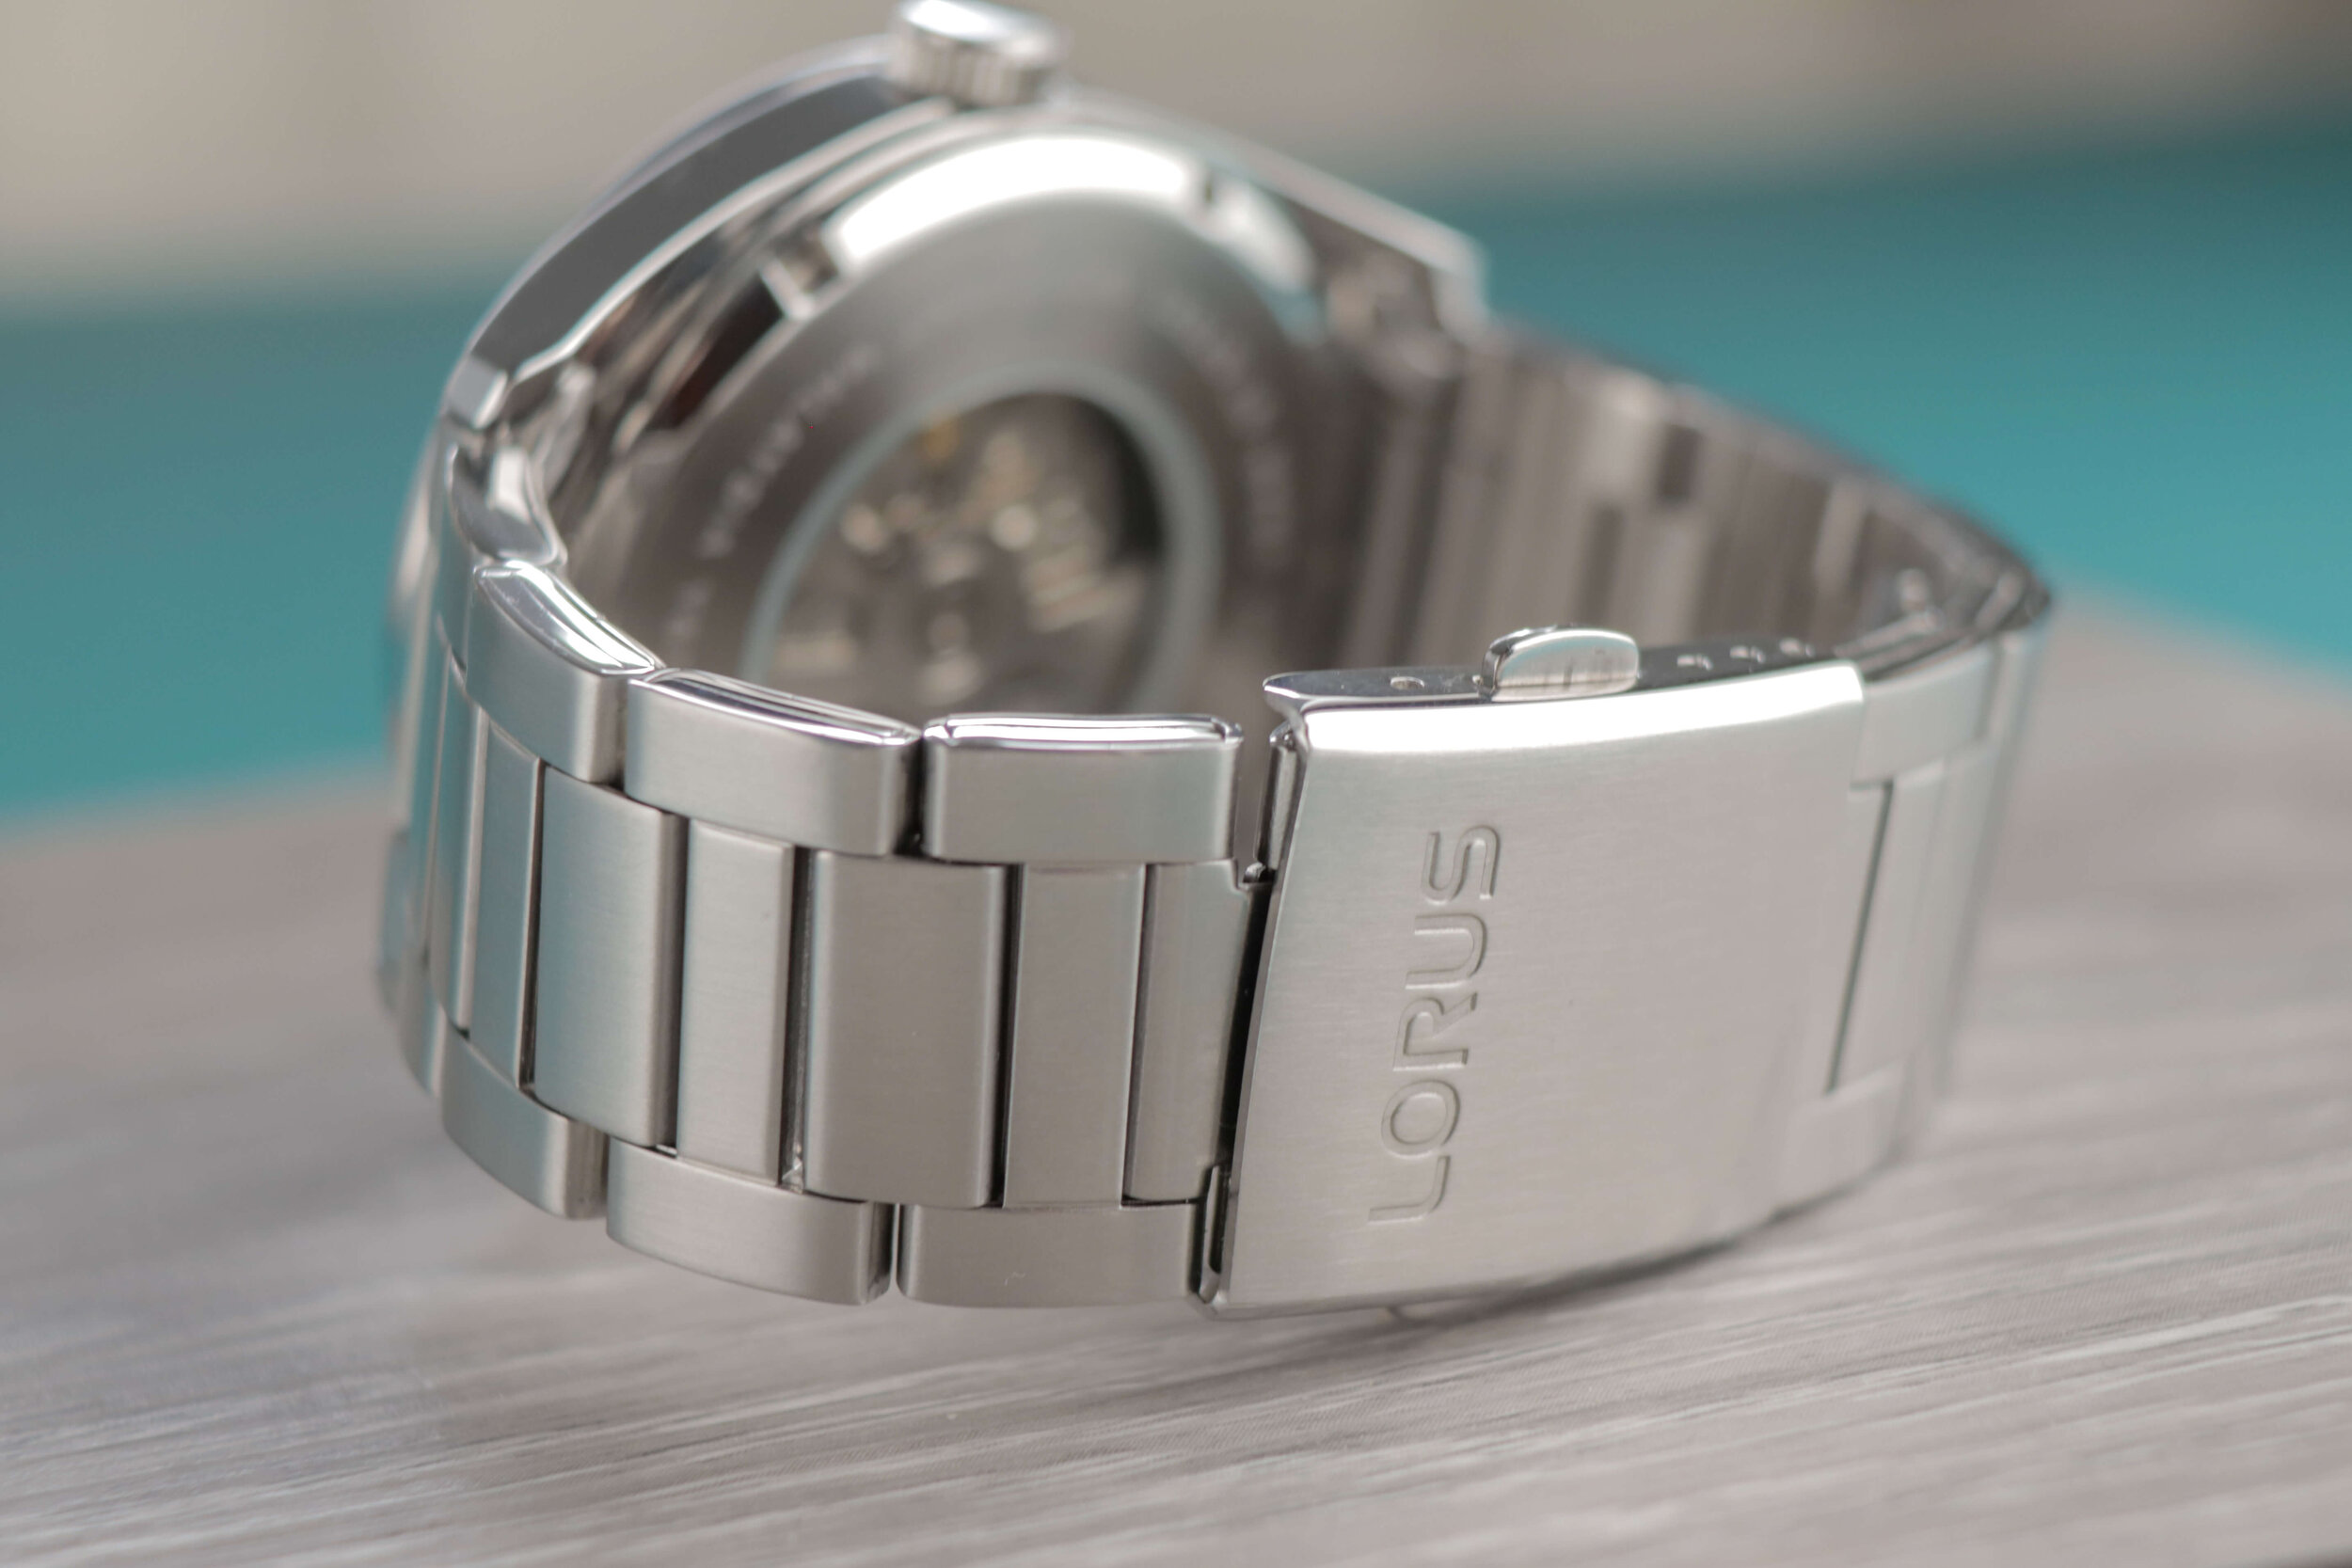 Lorus Automatic Watch Review - This Is A Seiko 5, But Better? — Ben's Watch  Club